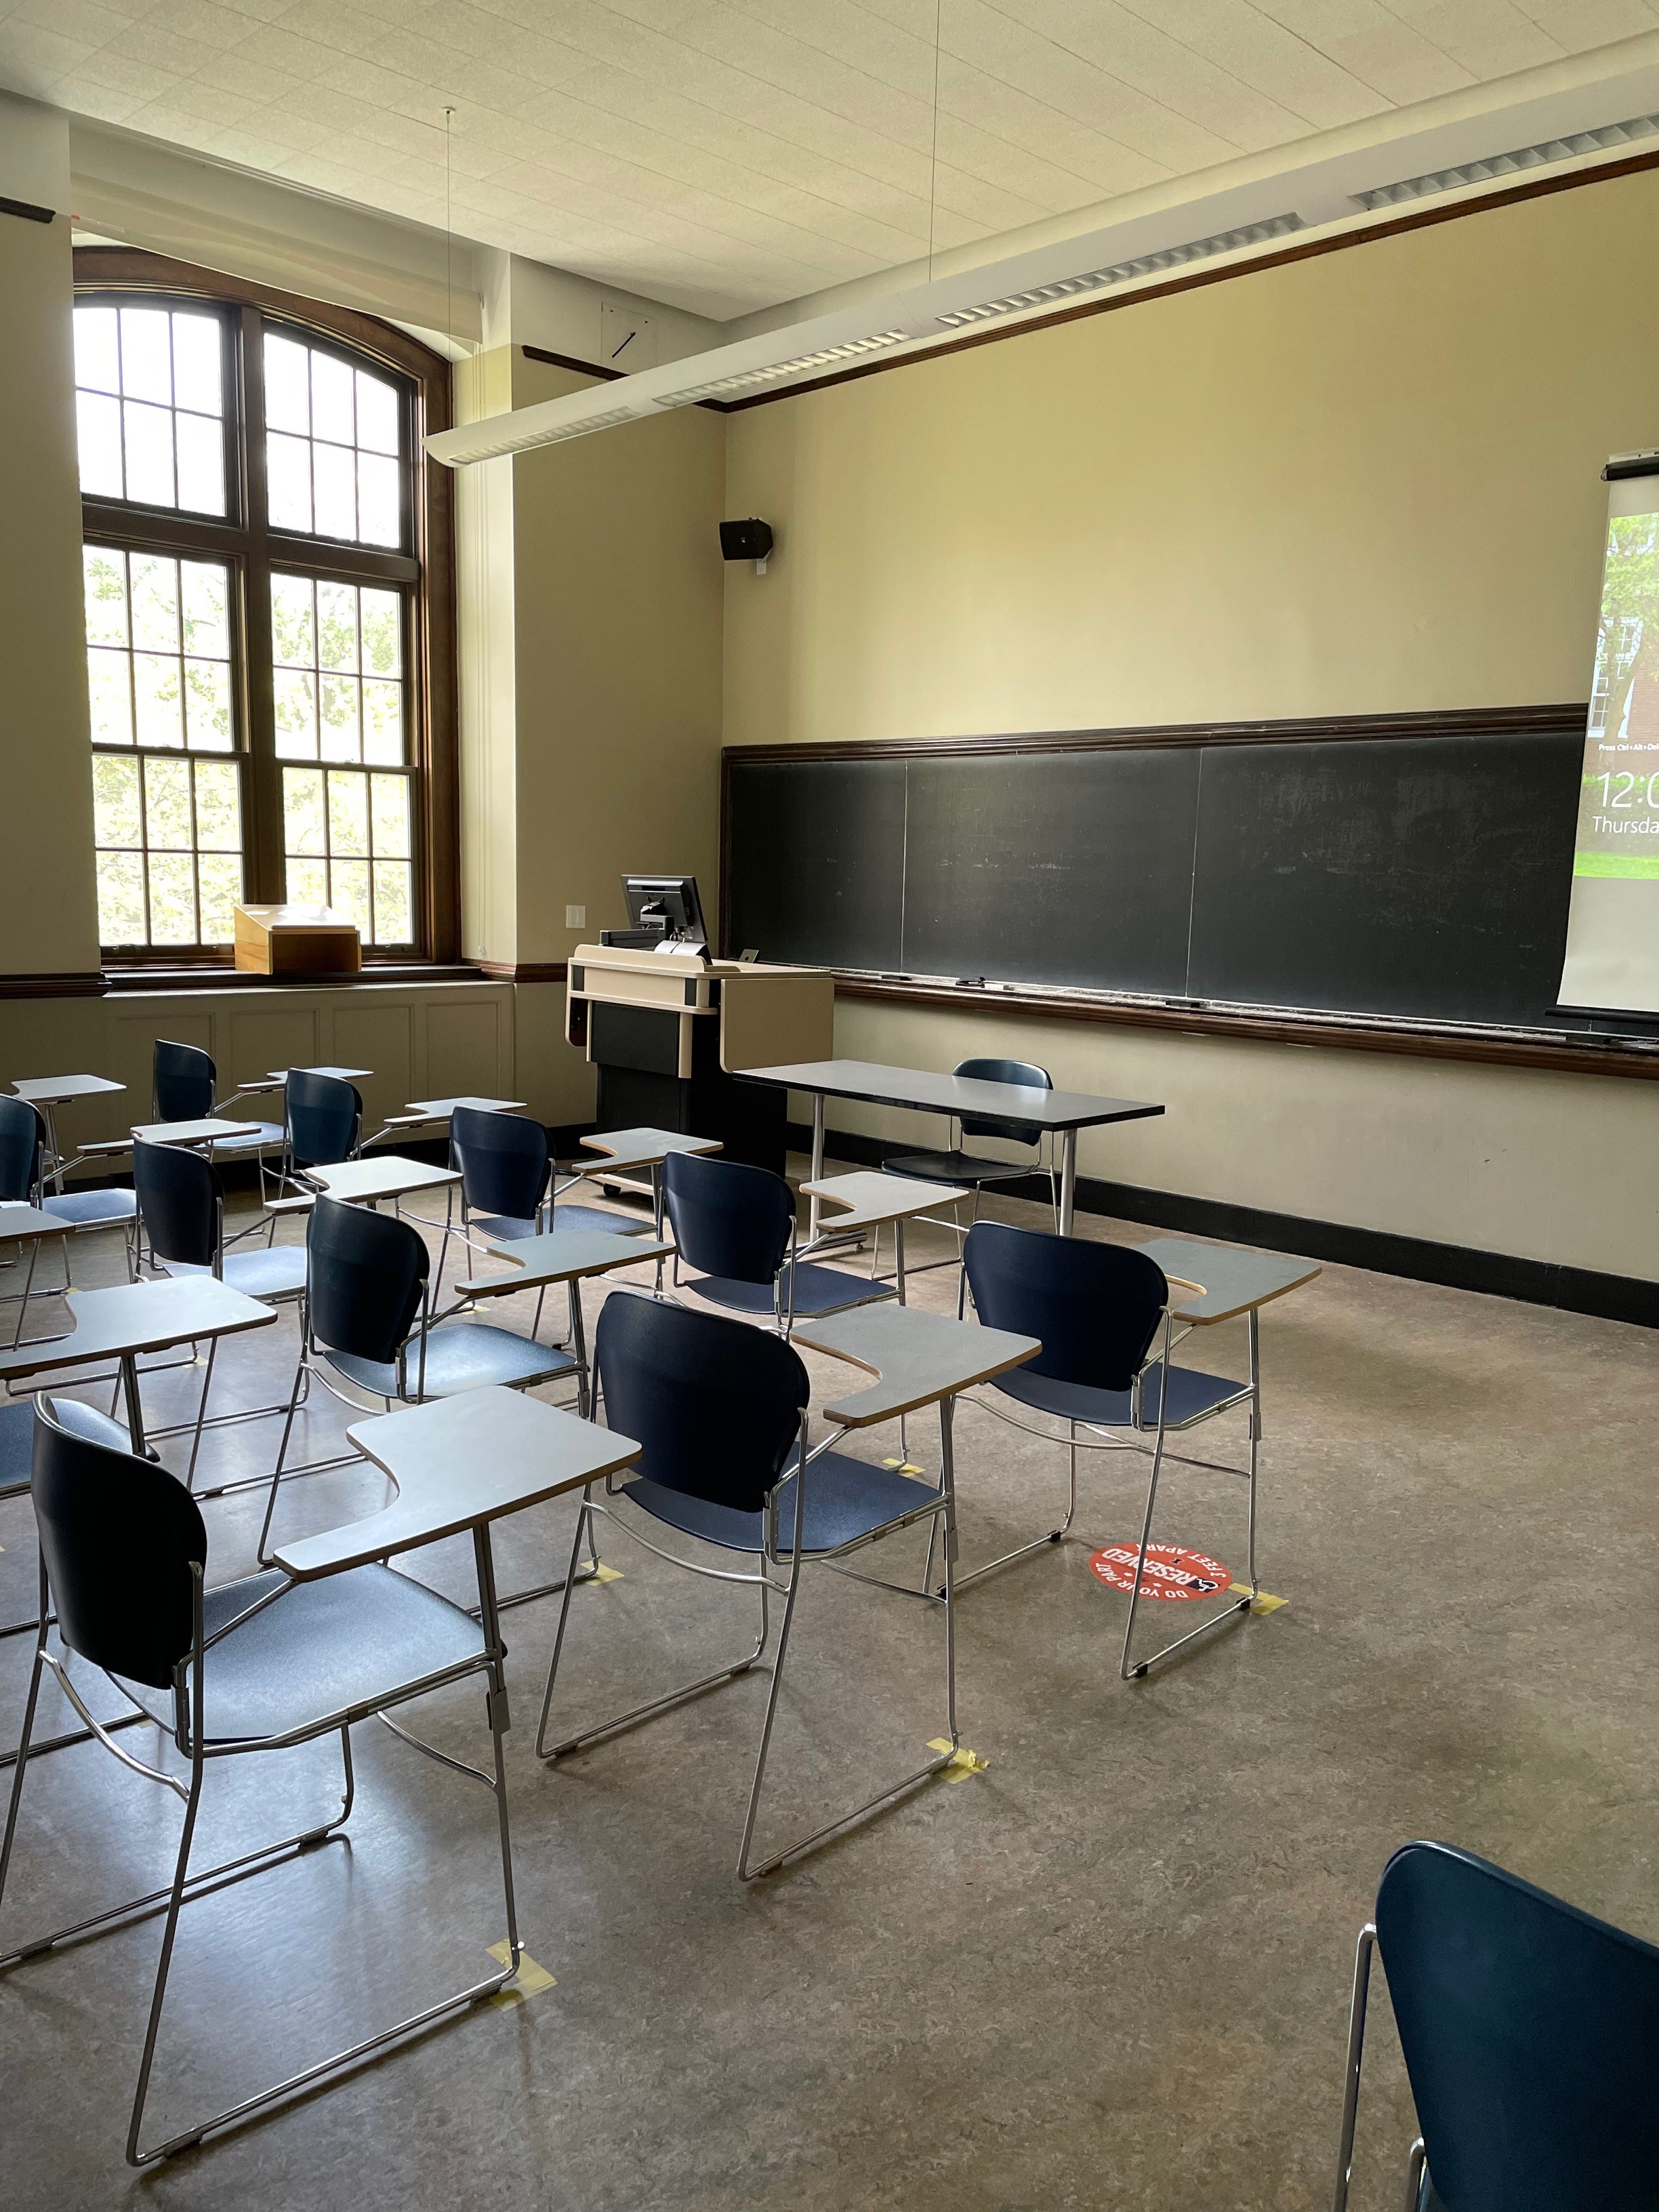 A view of the classroom with movable tableted arm chairs, chalkboard, and instructor table in front. 